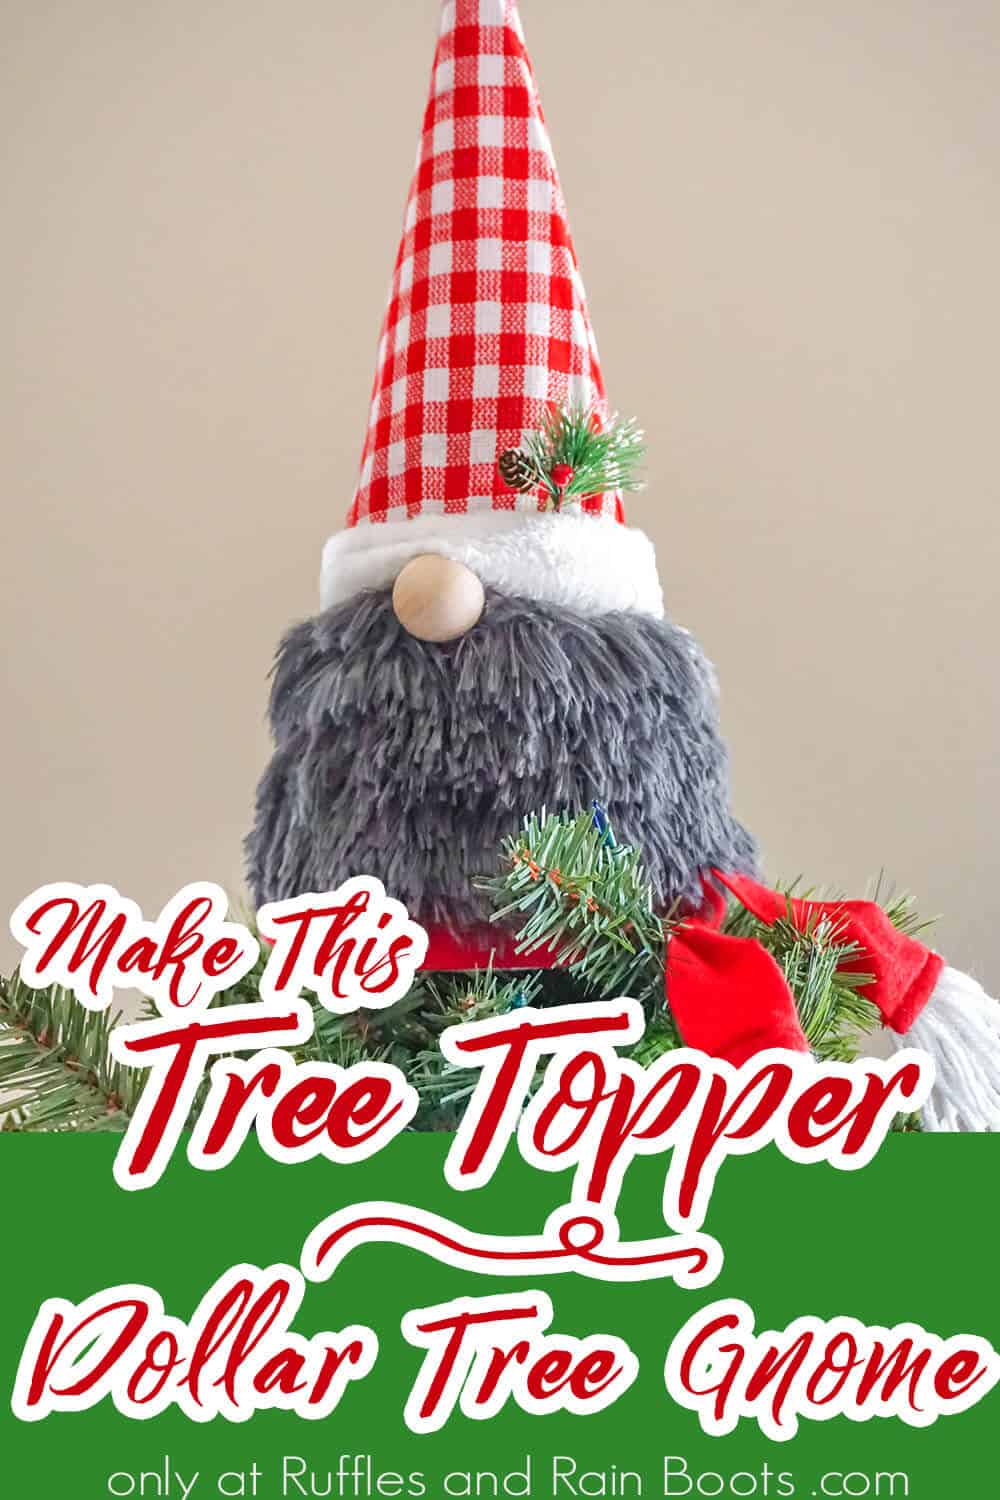 christmas tree topper gnome from dollar tree supplies with text which reads make this tree topper dollar tree gnome